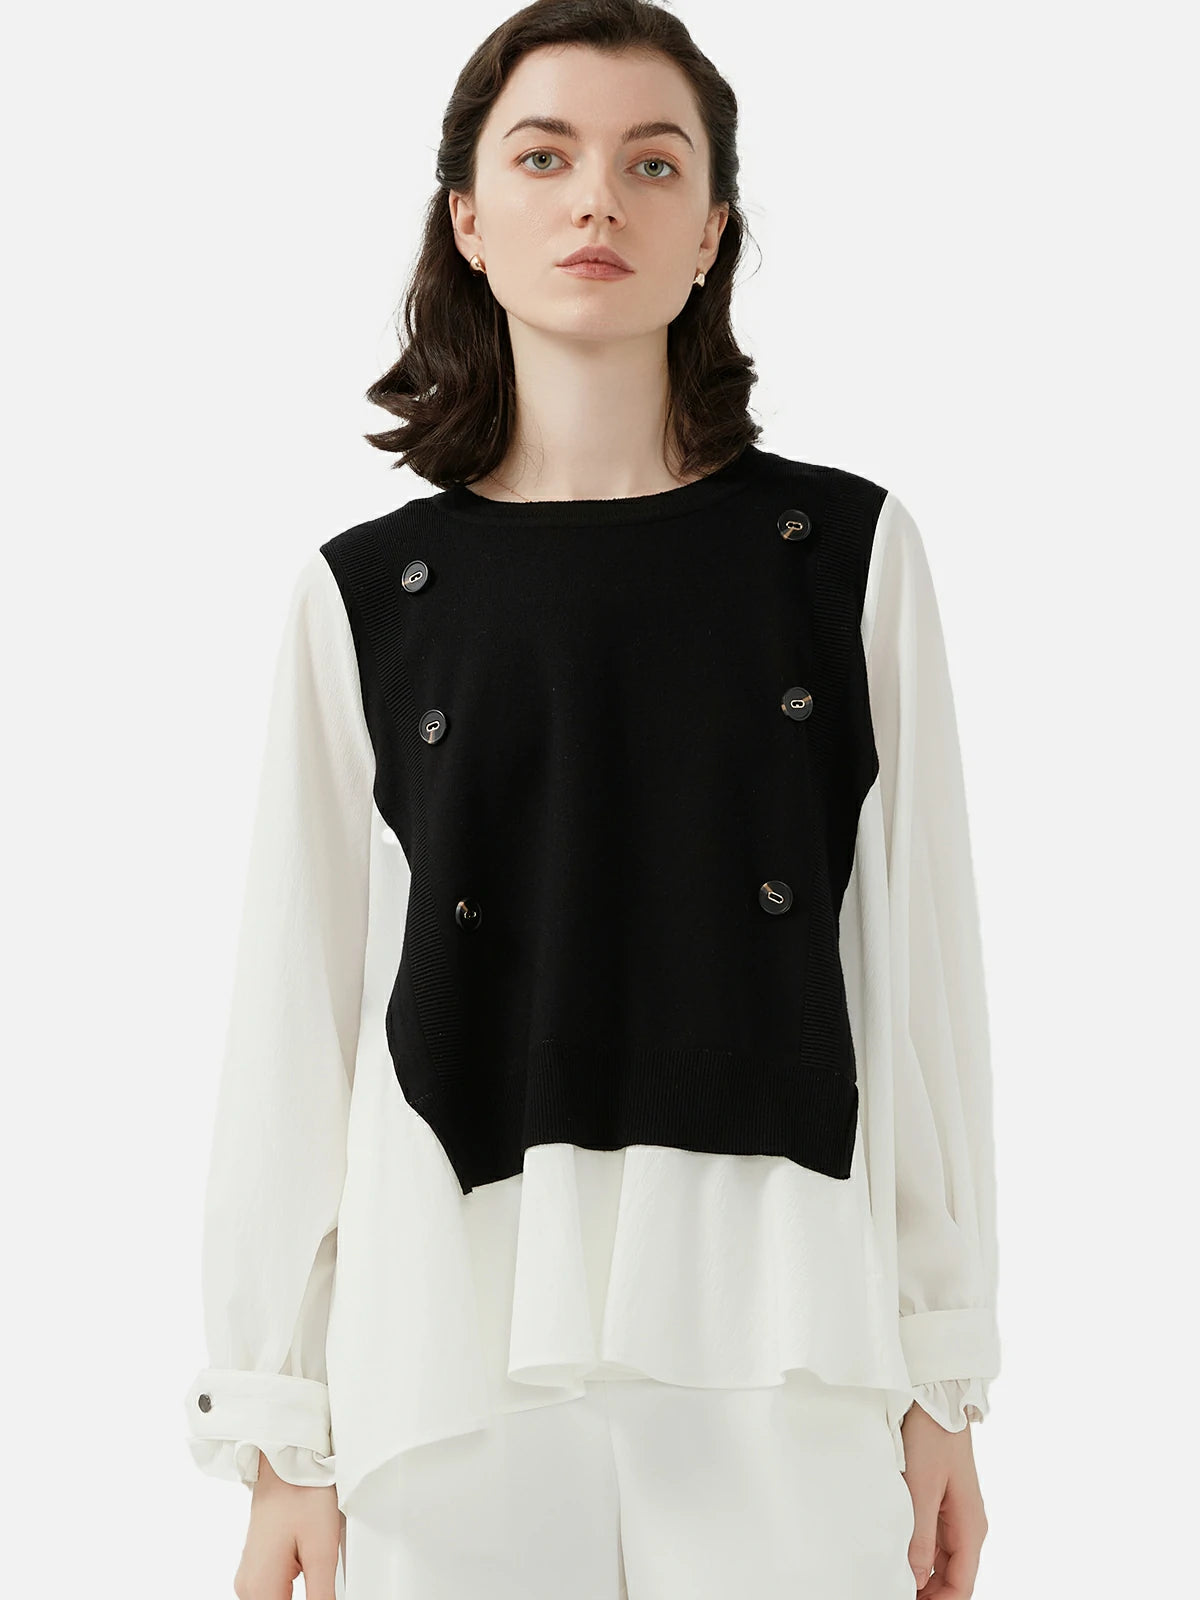 Stylish Black and White Knit Patchwork Shirt: A striking fashion contrast with ruffled edges.